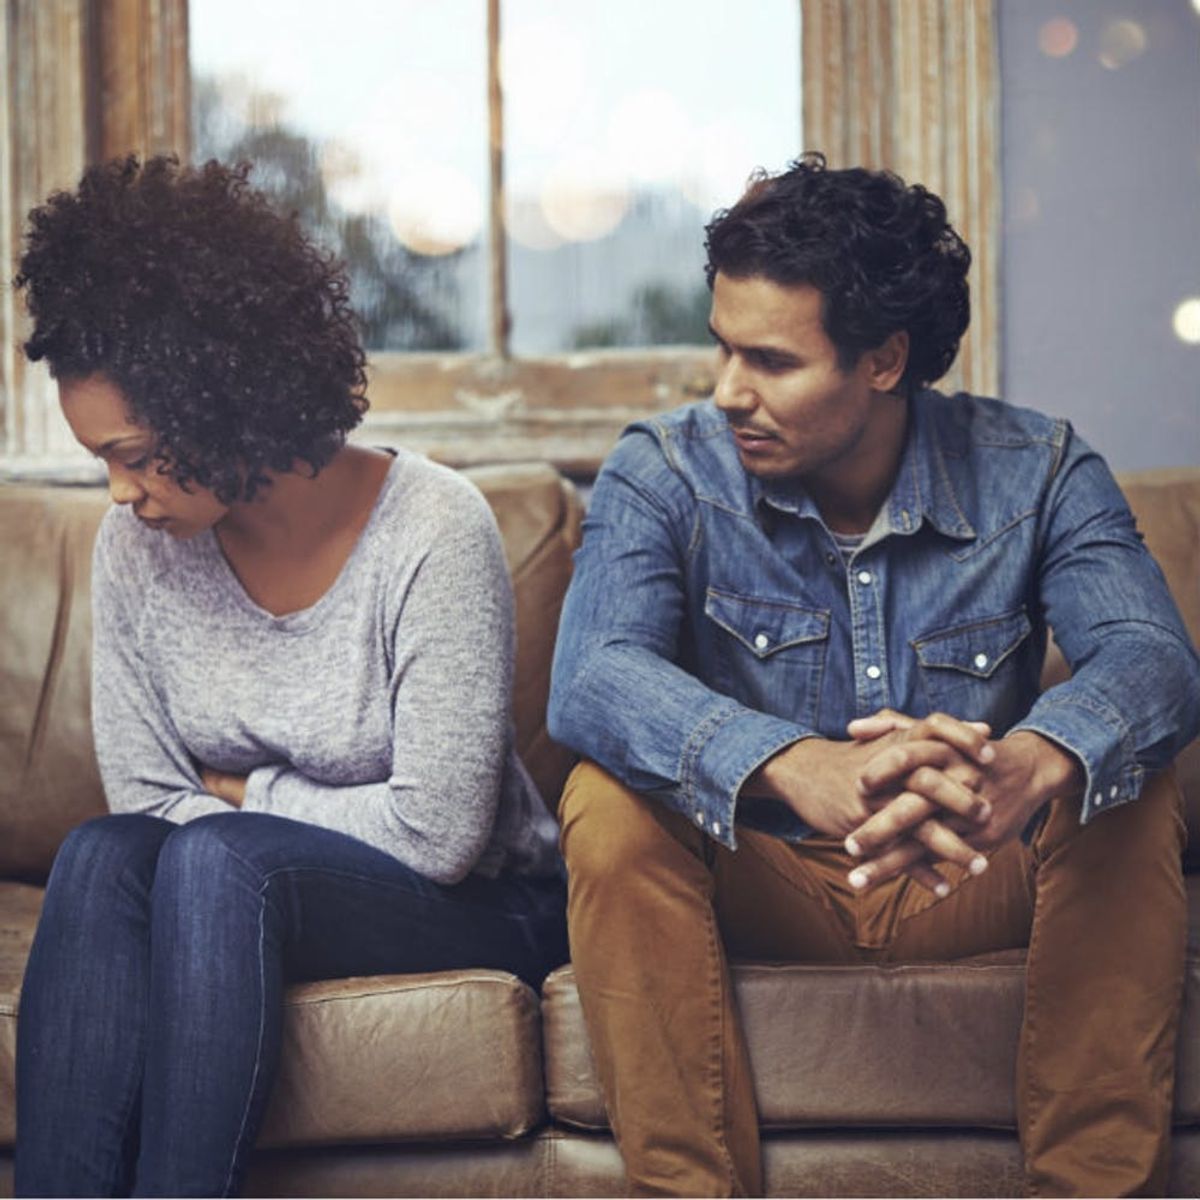 How to Deal With the Silent Treatment in a Relationship